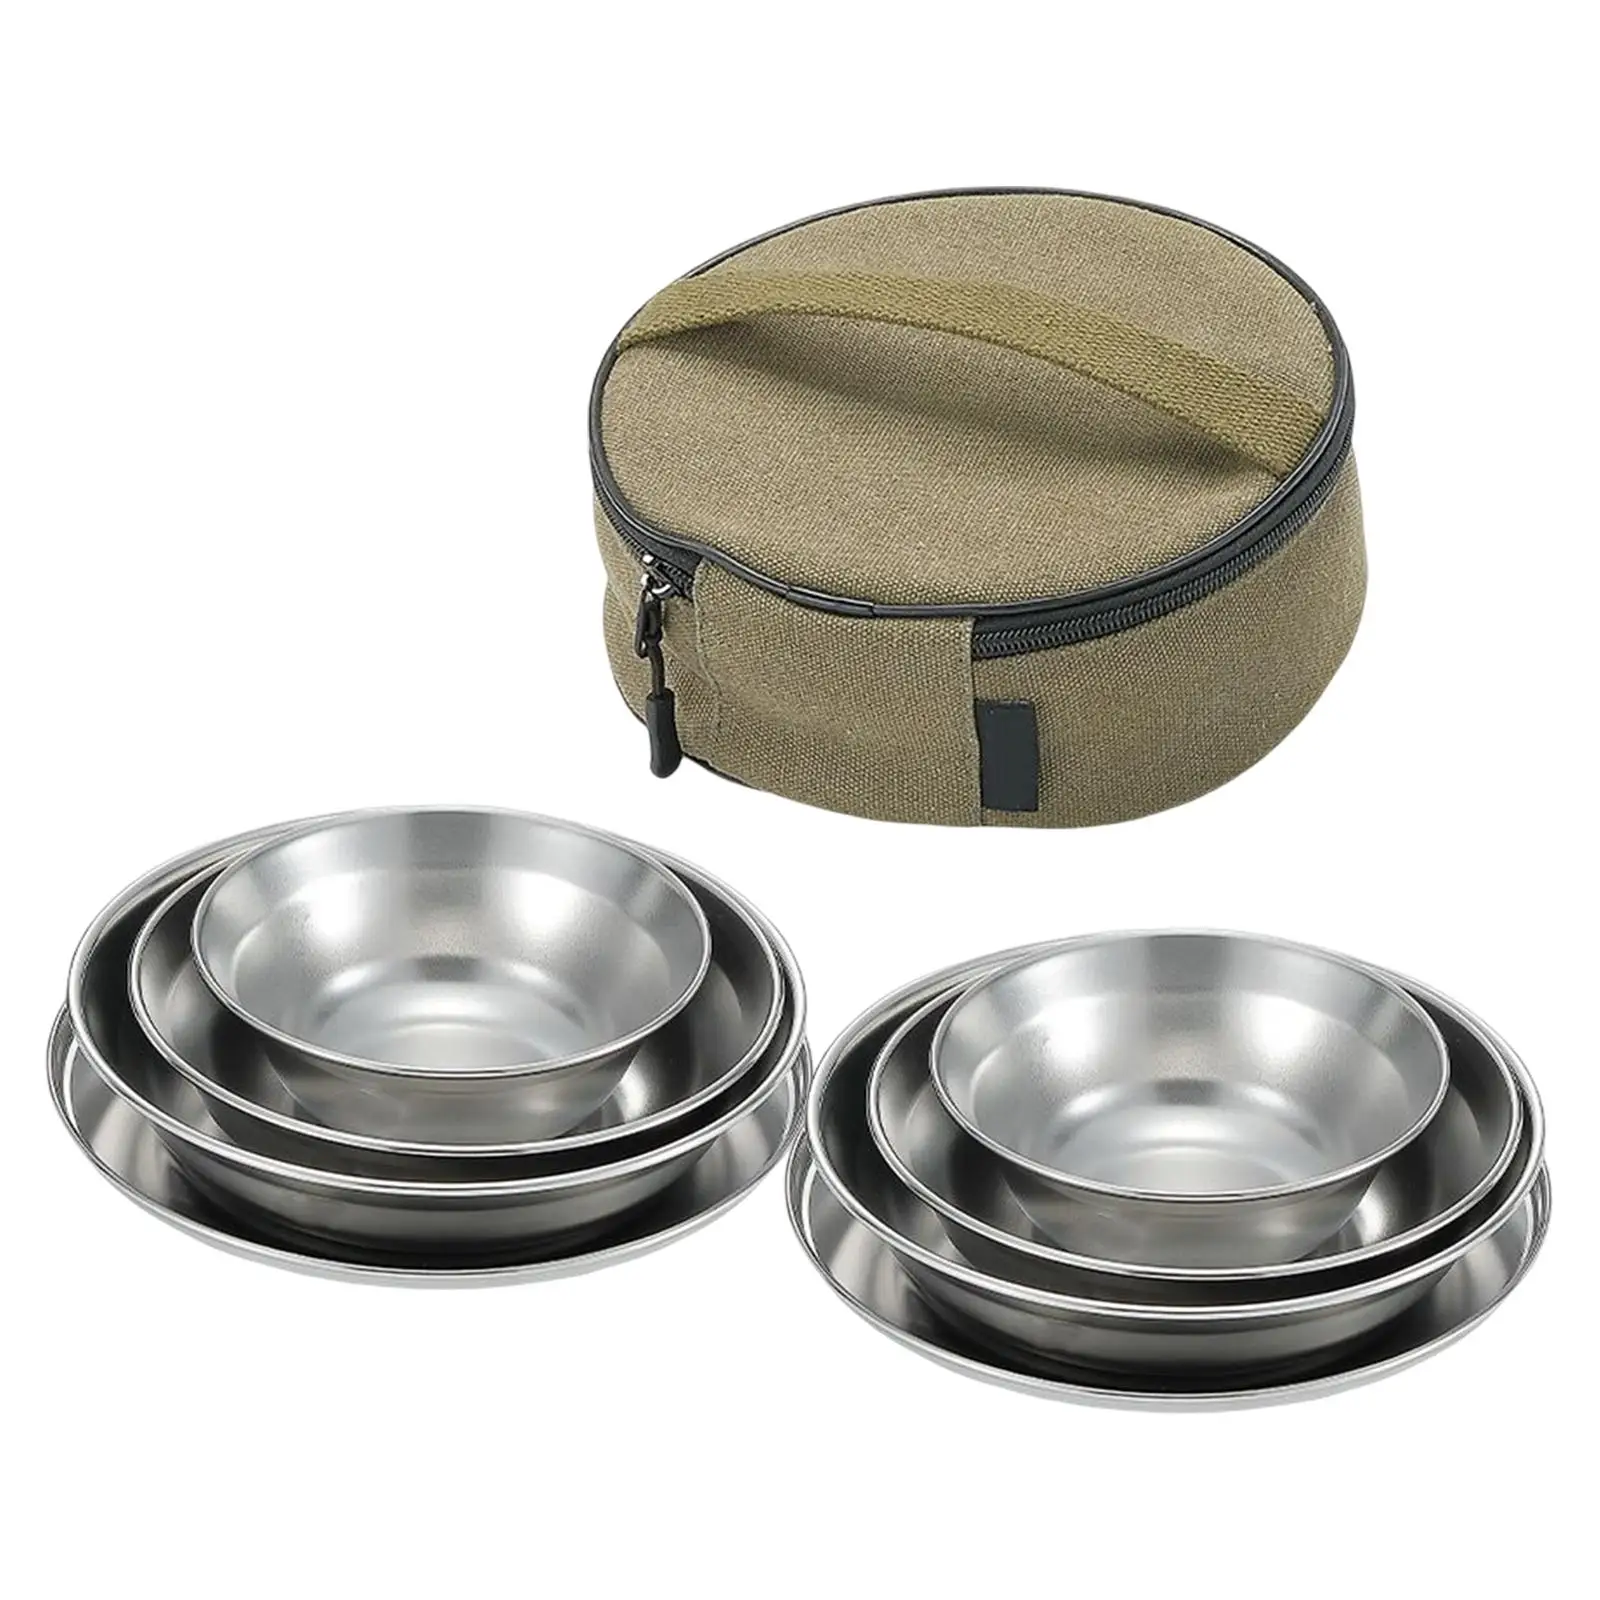 Stainless Steel Camping Dinnerware Set with Storage Bag Dinnerware Dinnerware Cutlery Soup Bowl Travel Tableware for Hiking BBQ